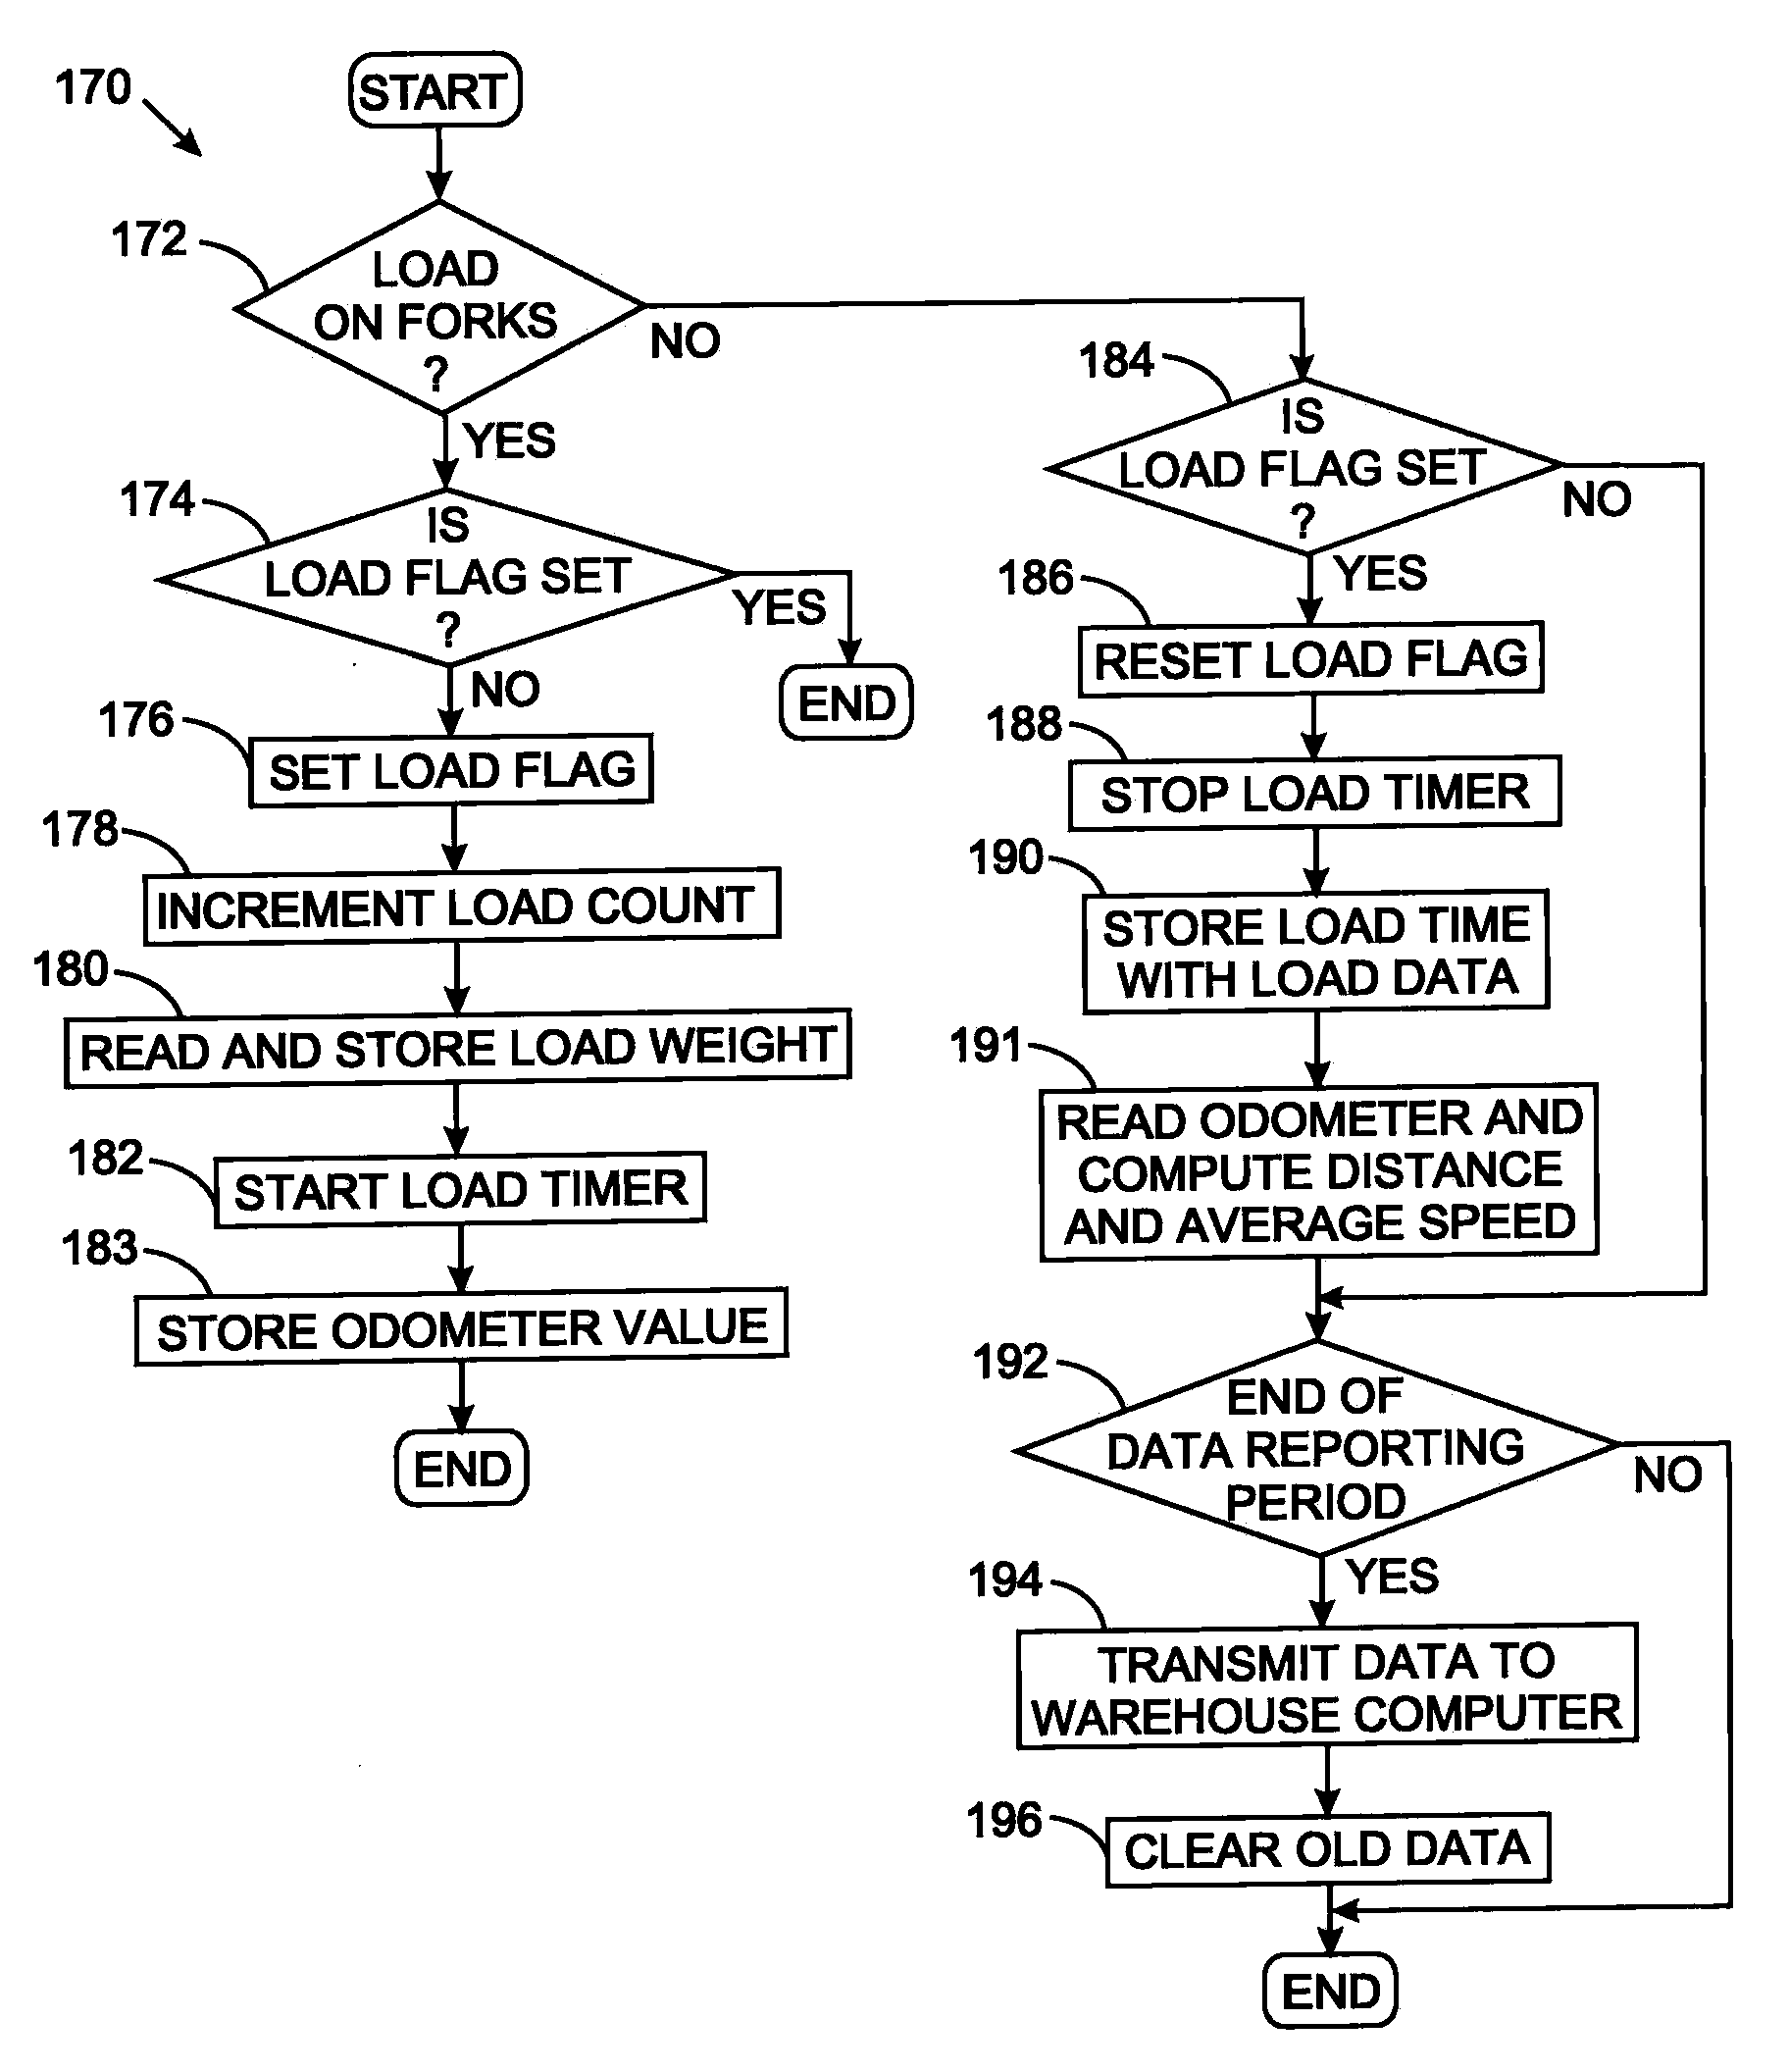 System for managing operation of industrial vehicles